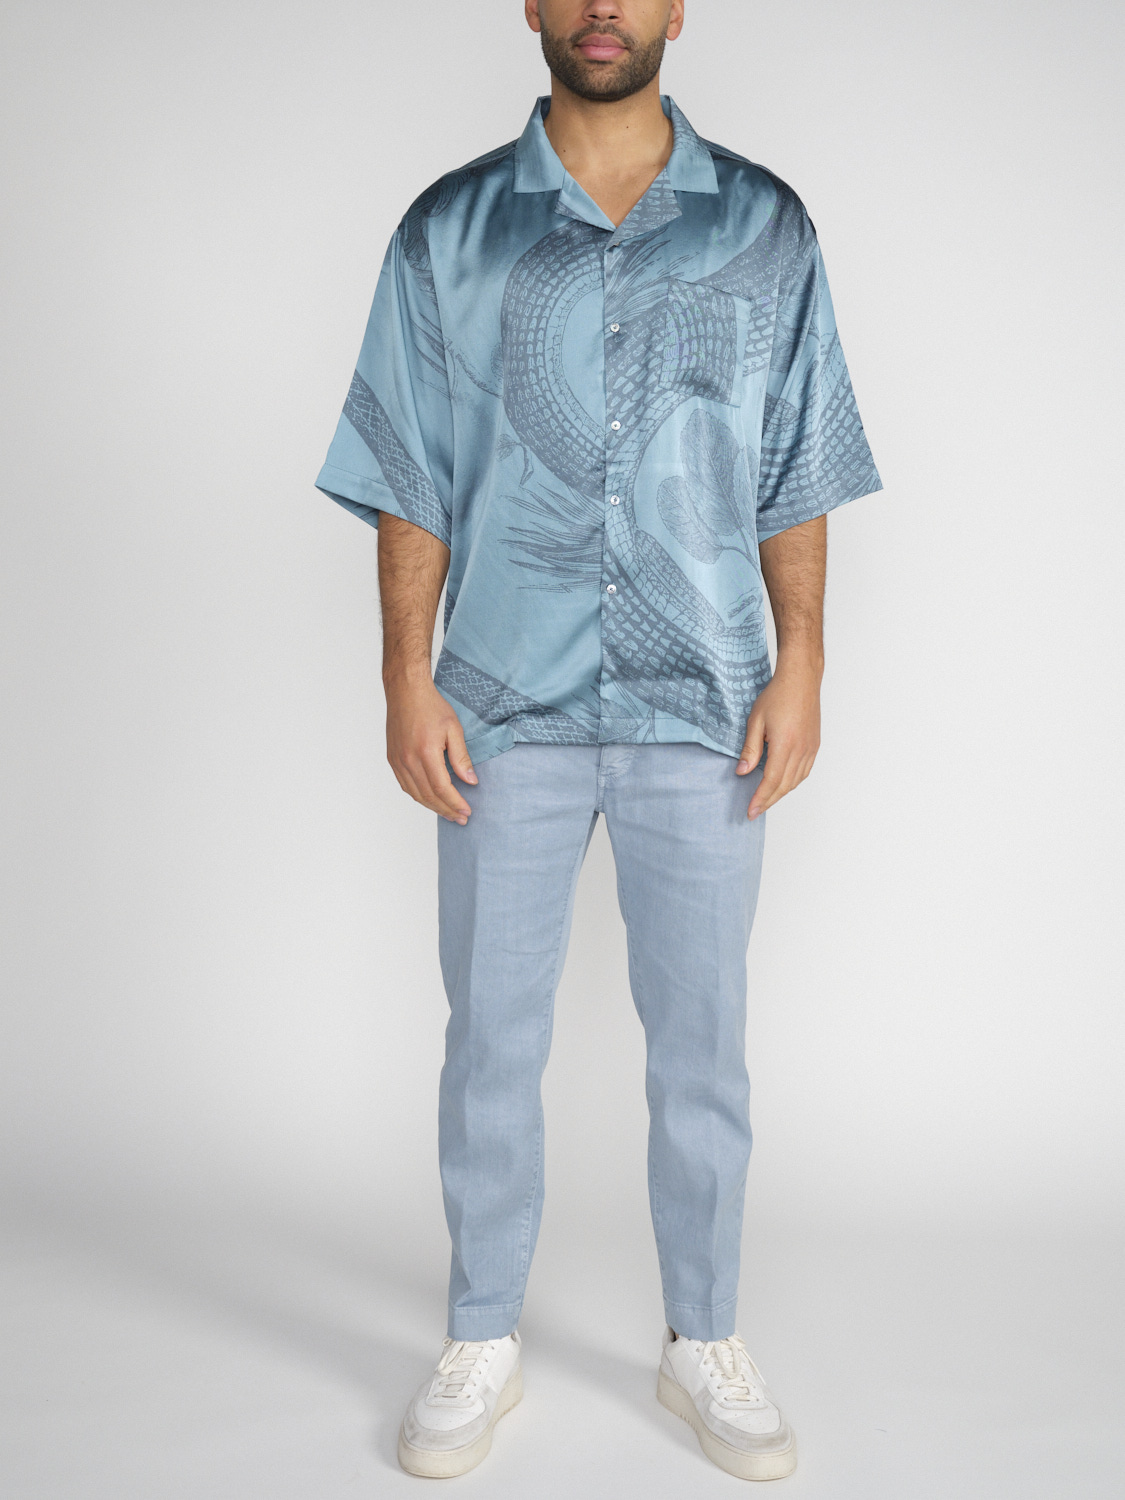 friendly hunting Chemise Grow – silk shirt with a heavenly pattern  mint S